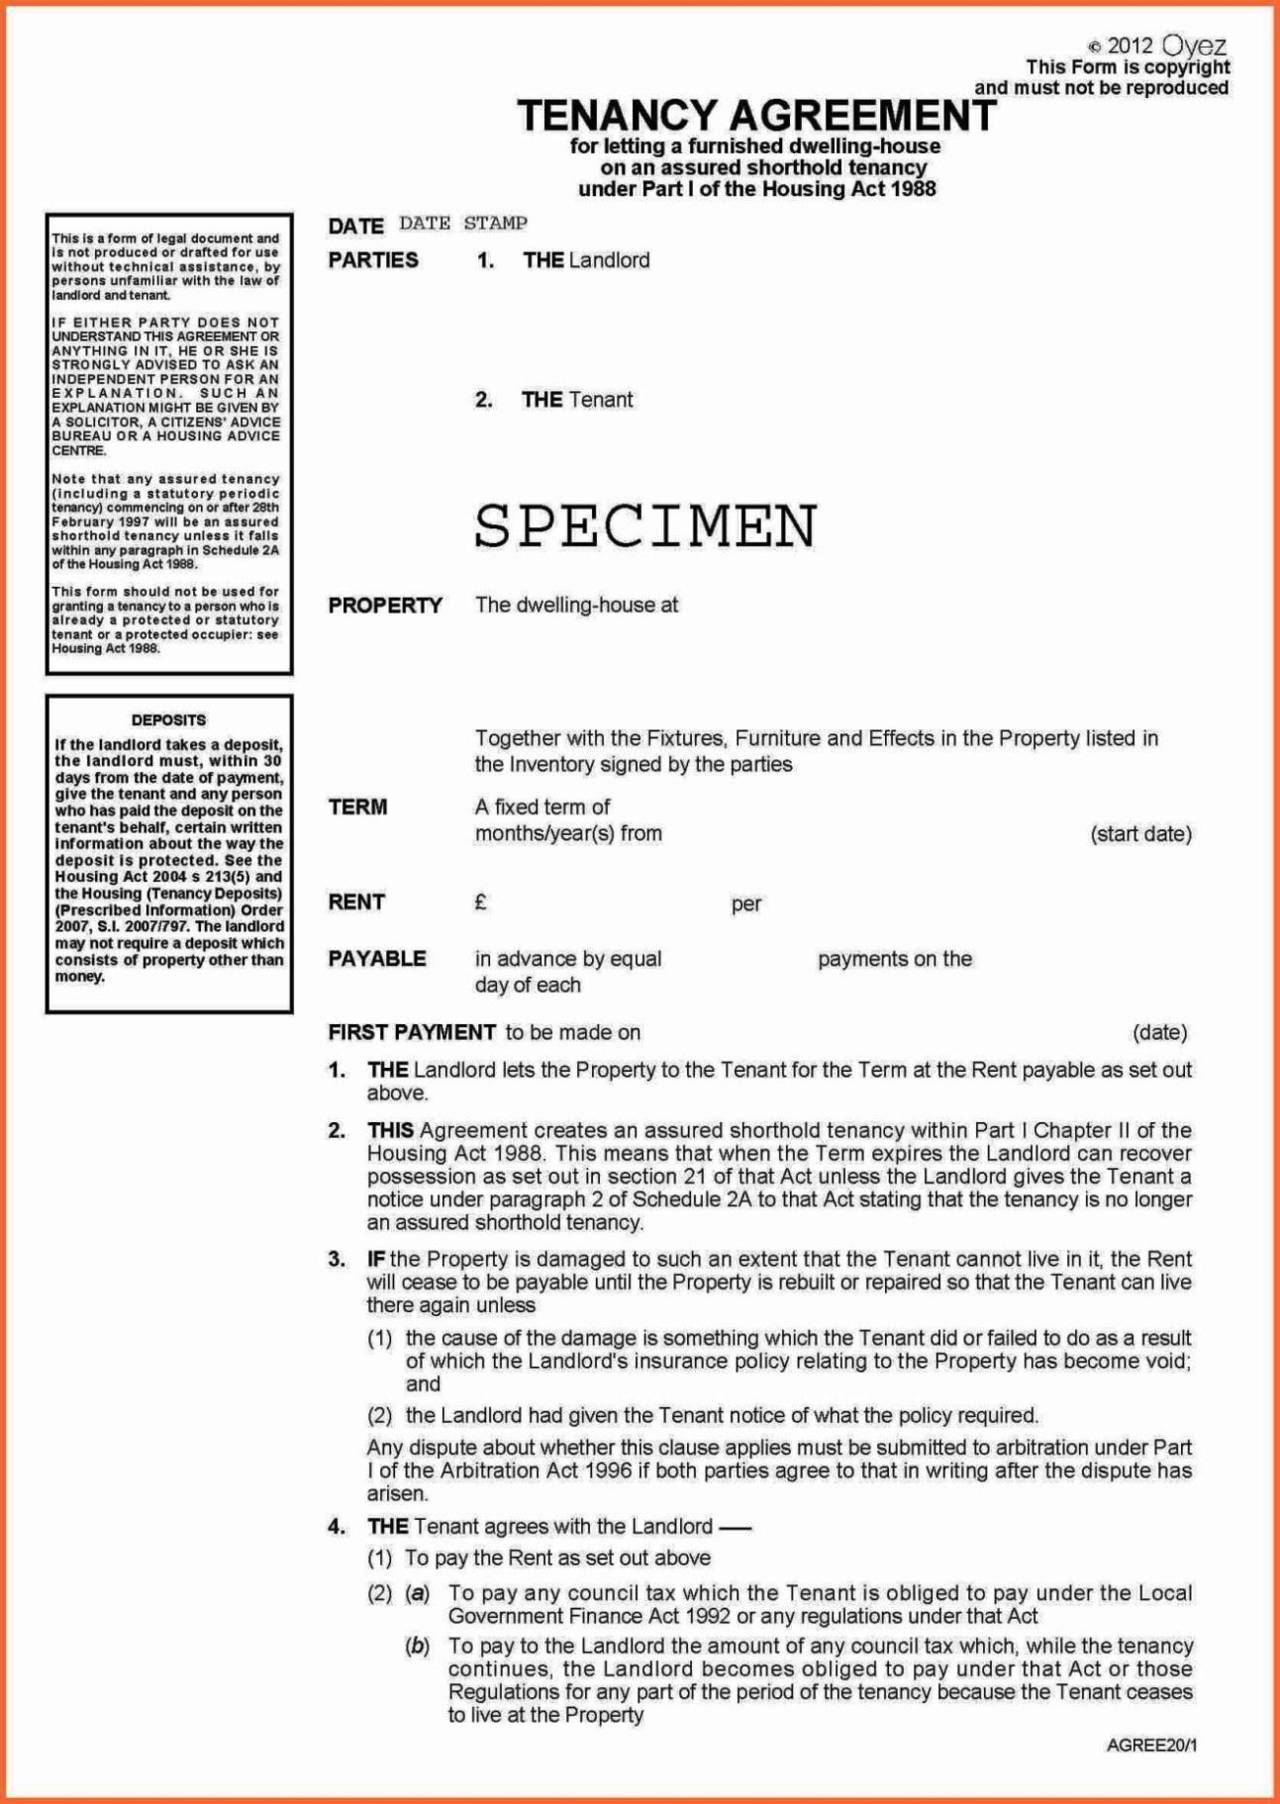 assured-shorthold-tenancy-agreement-template-free-download